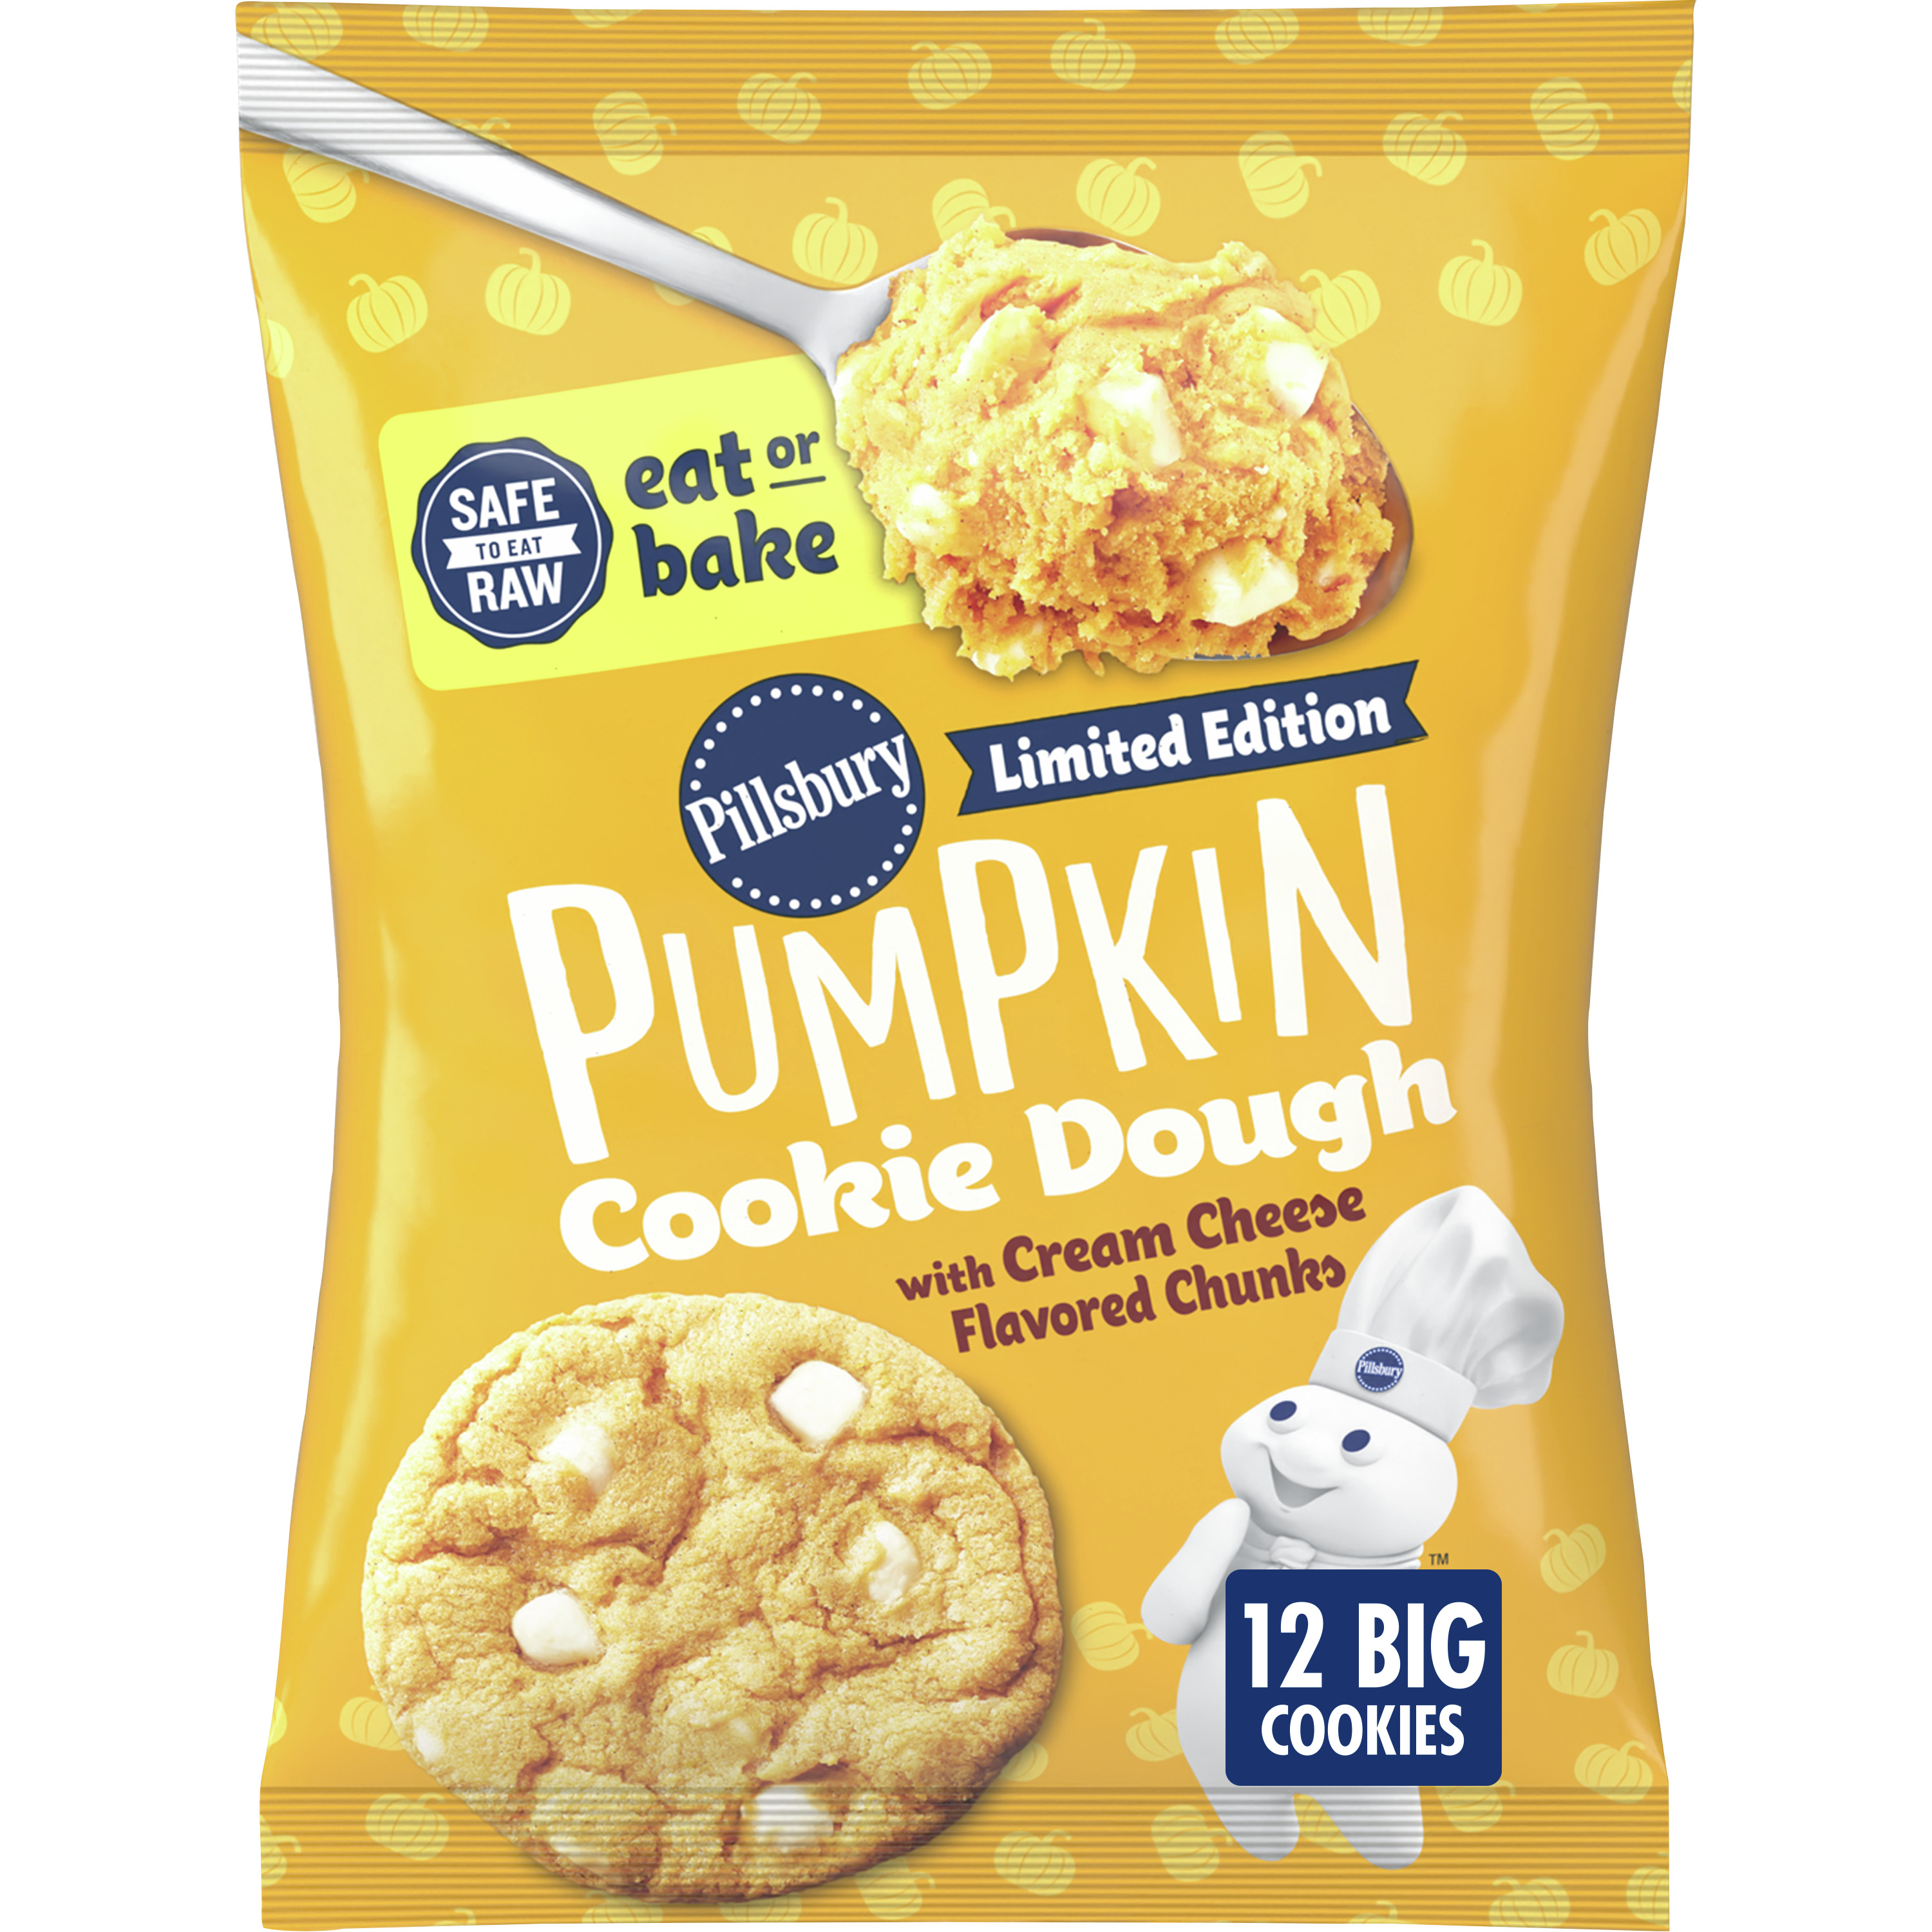 Pillsbury Ready to Bake! Pumpkin Cookie Dough with Cream Cheese Flavored Chips, 12 ct., 14 oz. - image 1 of 9